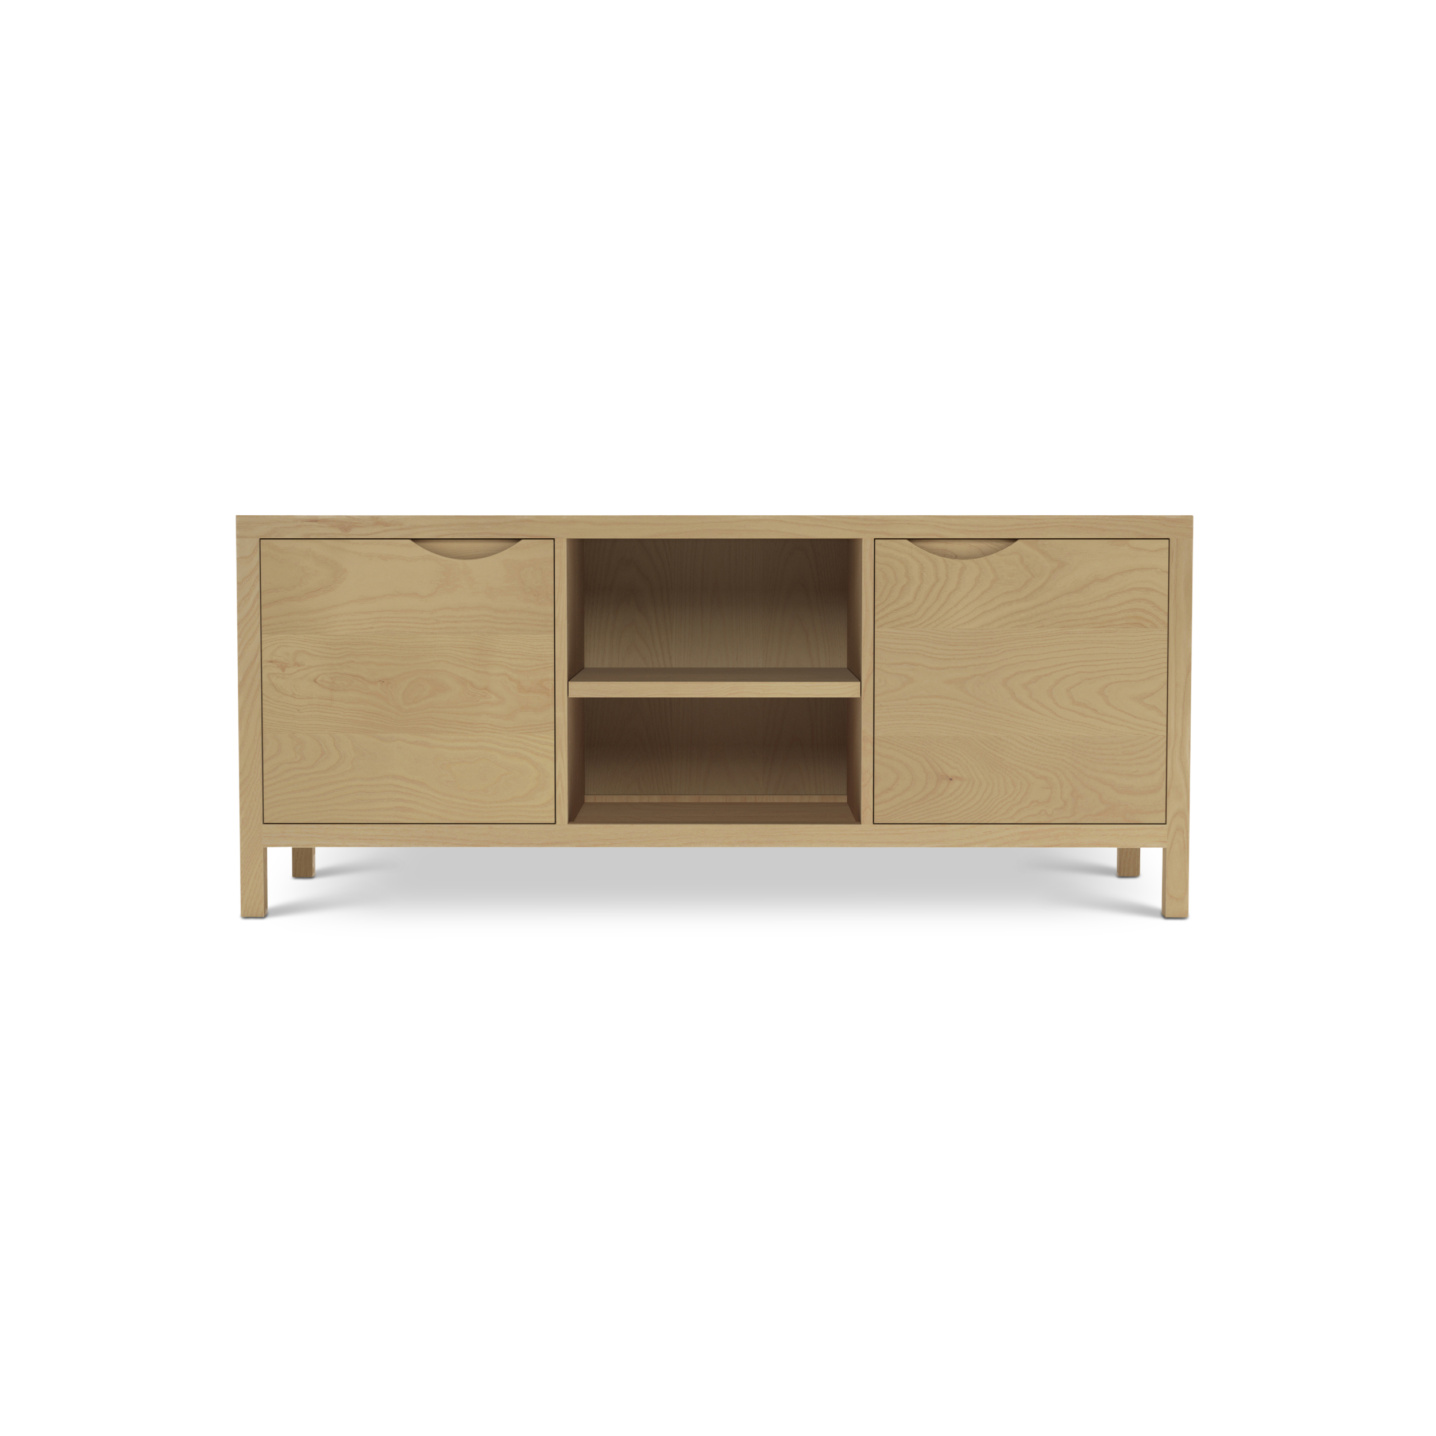 60" two door solid ash modern media console